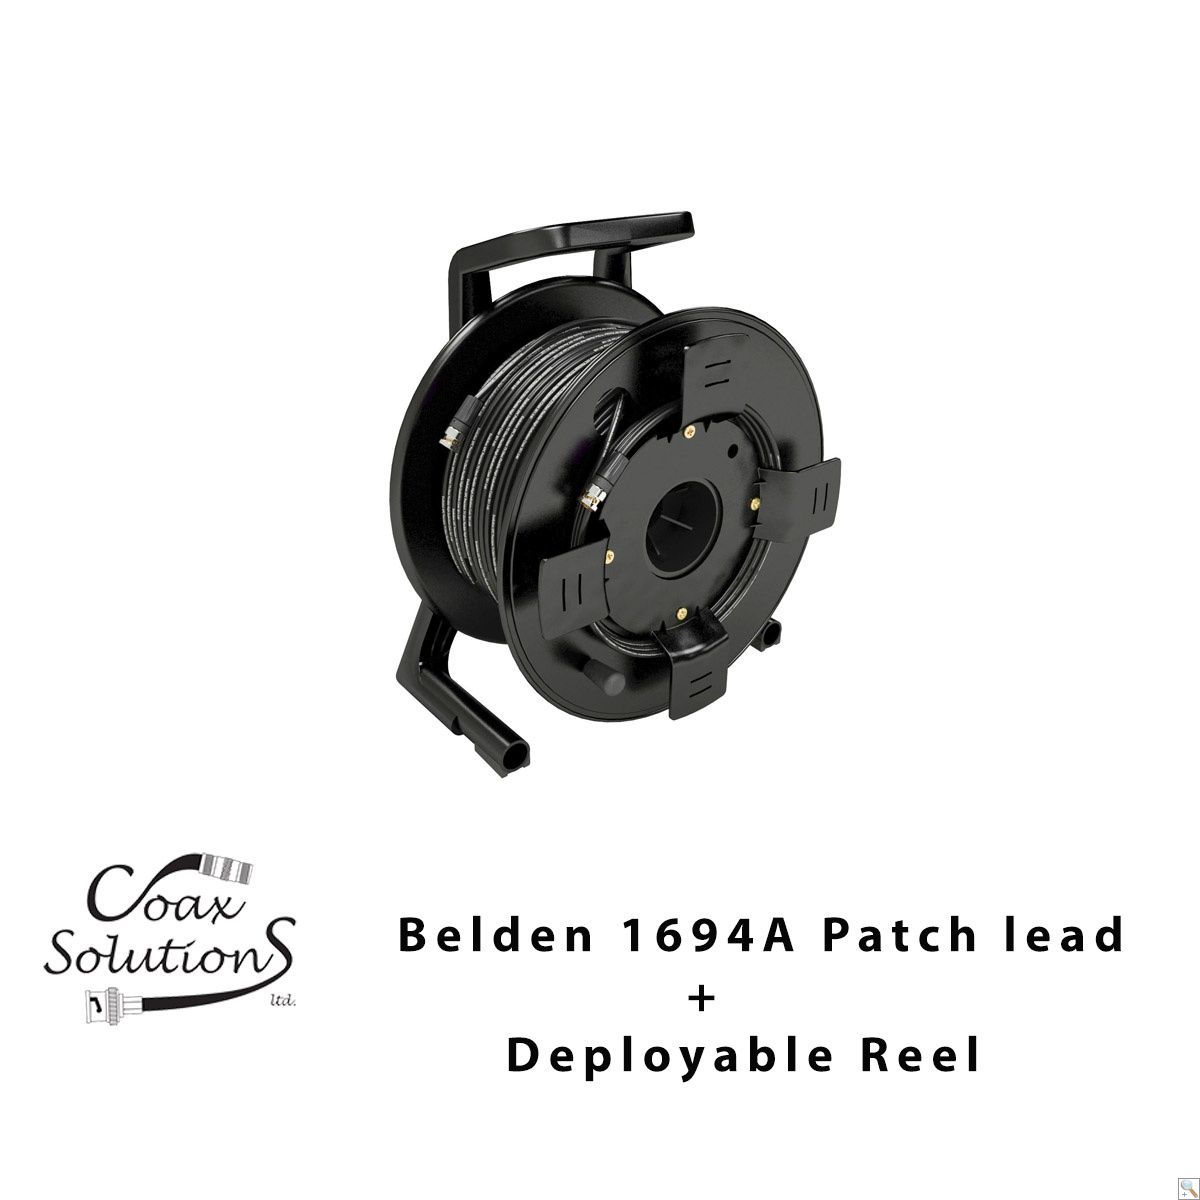 Belden 1694A HD-SDI Patch Cable + Deployable Reel